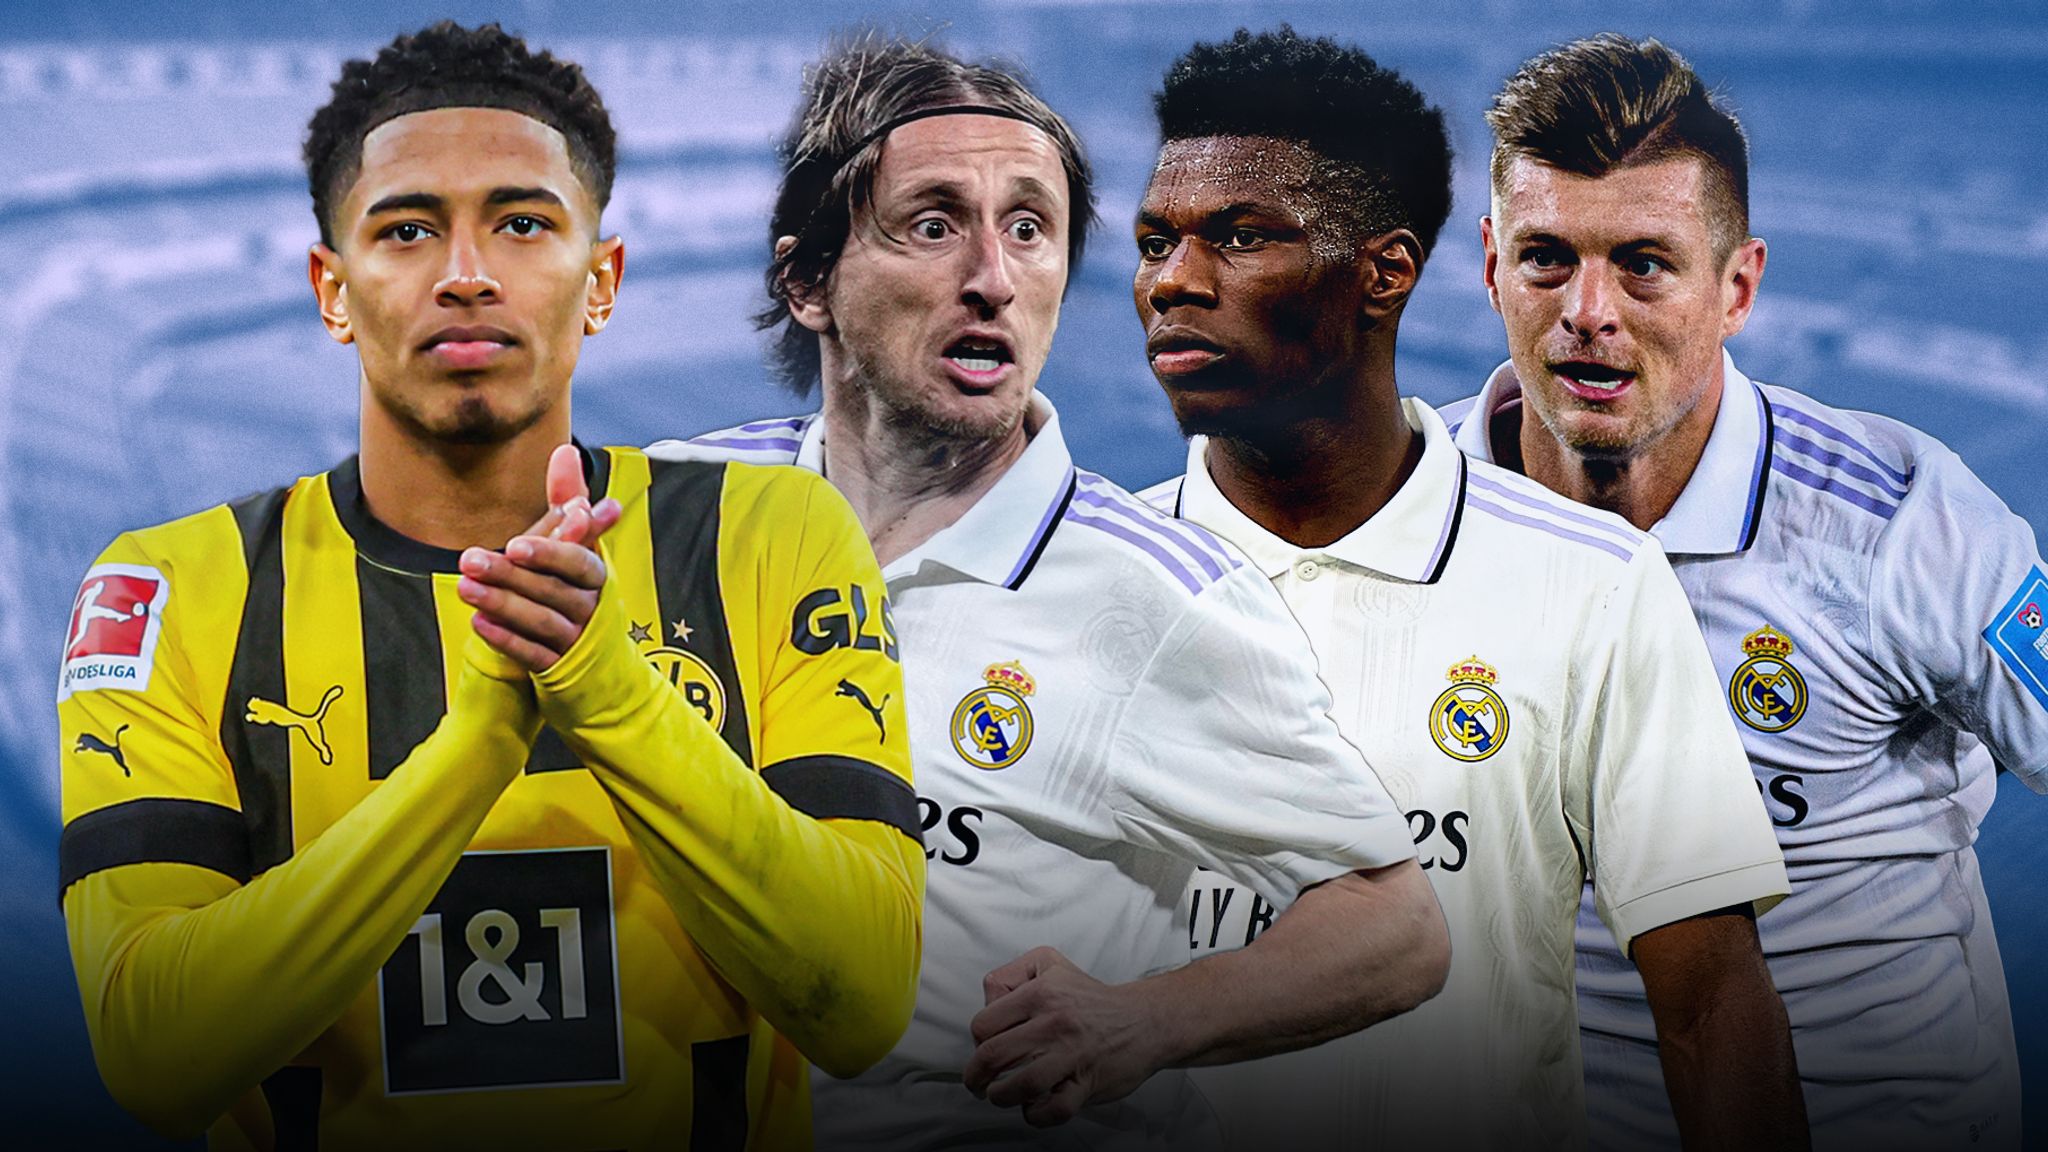 The 4 Real Madrid players currently set to leave on a free this summer